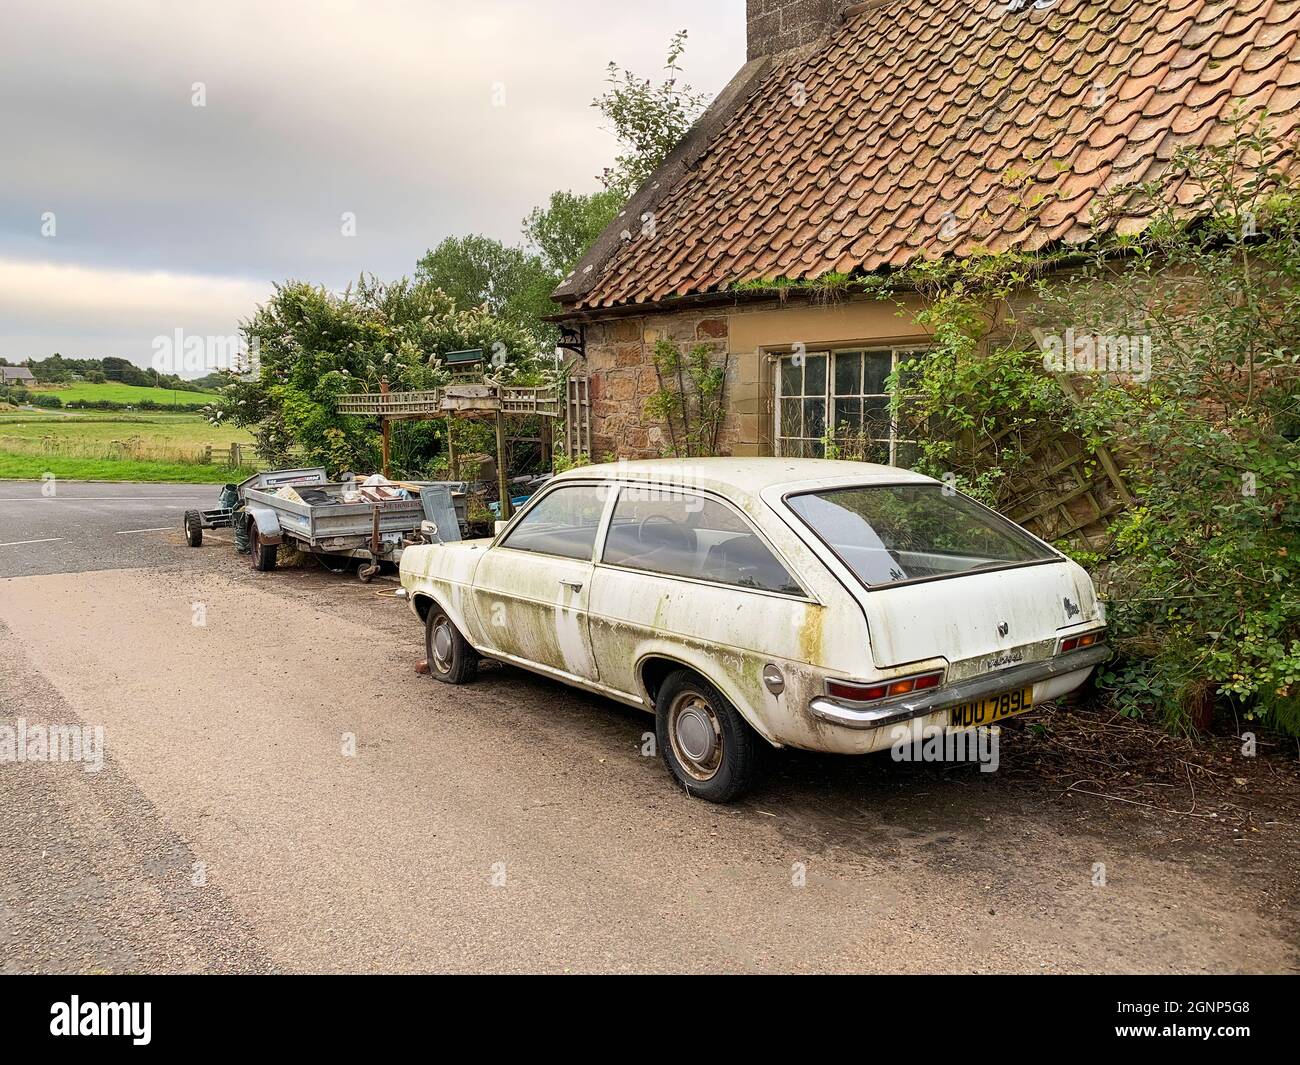 CORNHILL-ON-TWEED, UNITED KINGDOM - Aug 26, 2021: Rear view of a classic vauxhall viva estate car once common on british roads but now a rare sight Stock Photo